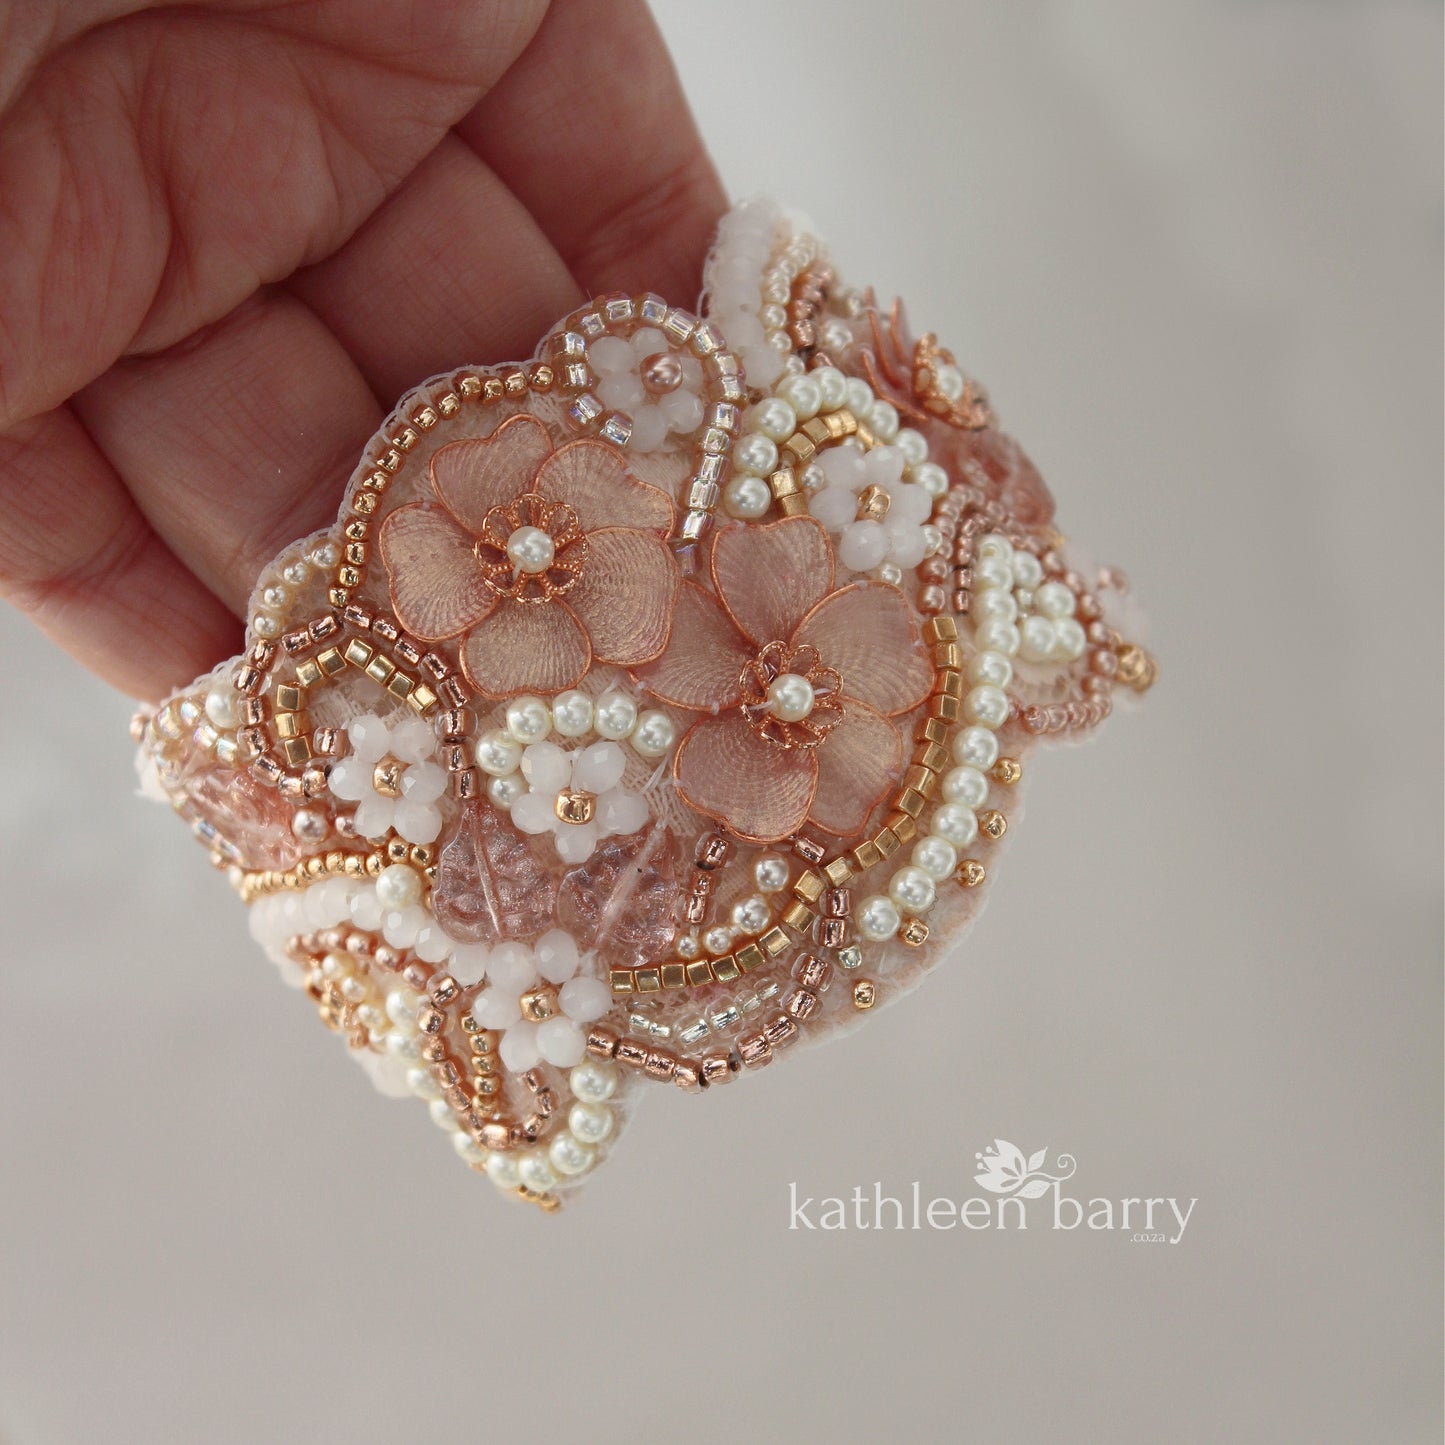 Saleo floral lace cuff bracelet - pearl crystal embellished, custom colors available